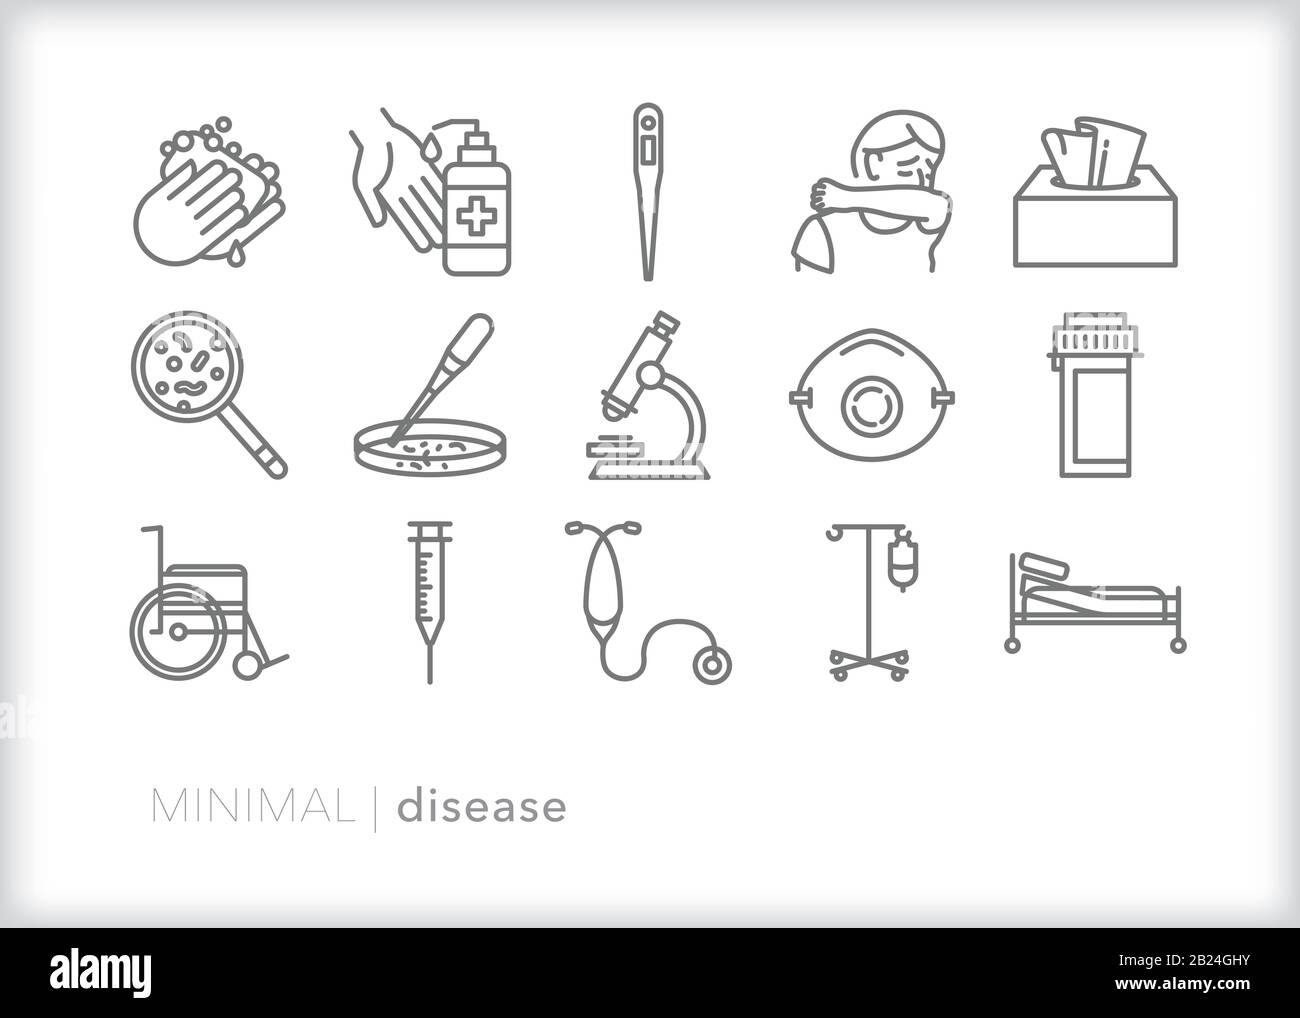 Set of 15 disease line icons of cold and flu symptoms including cough and sneeze, as well as research to develop vaccine for contagion or epidemic Stock Vector